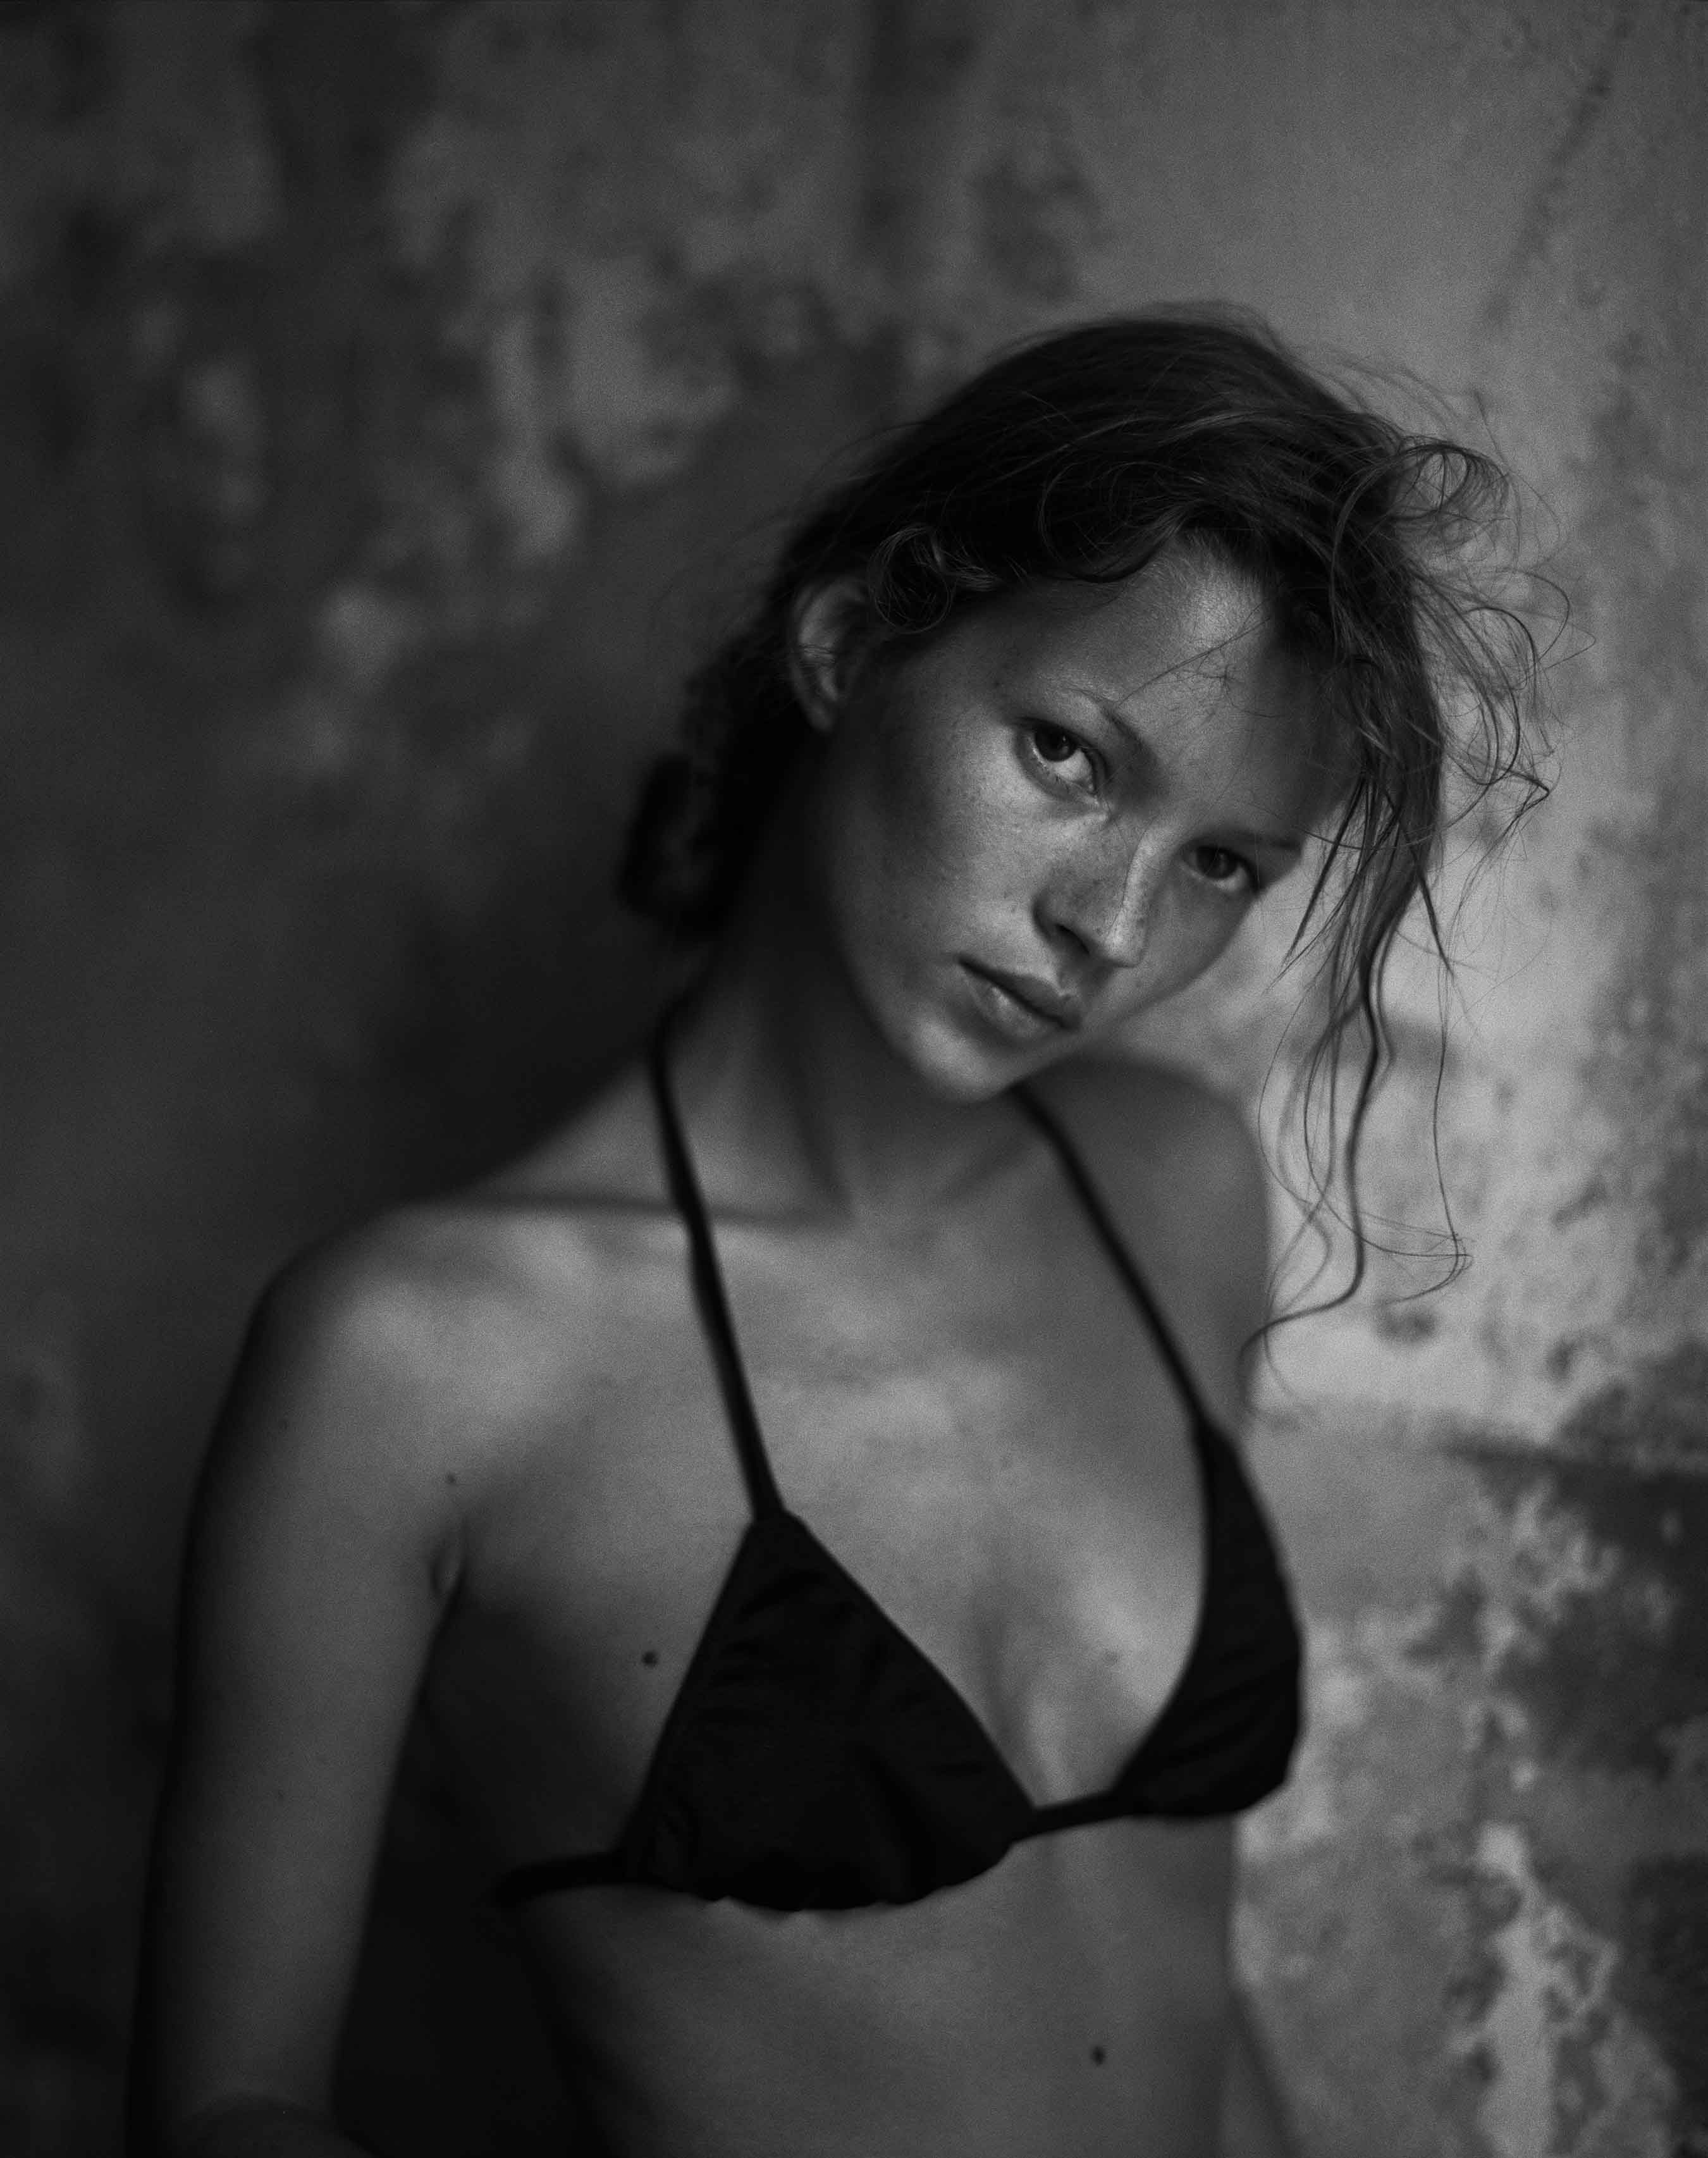 Kate Moss by Mario Sorrenti, from Kate by Mario Sorrenti